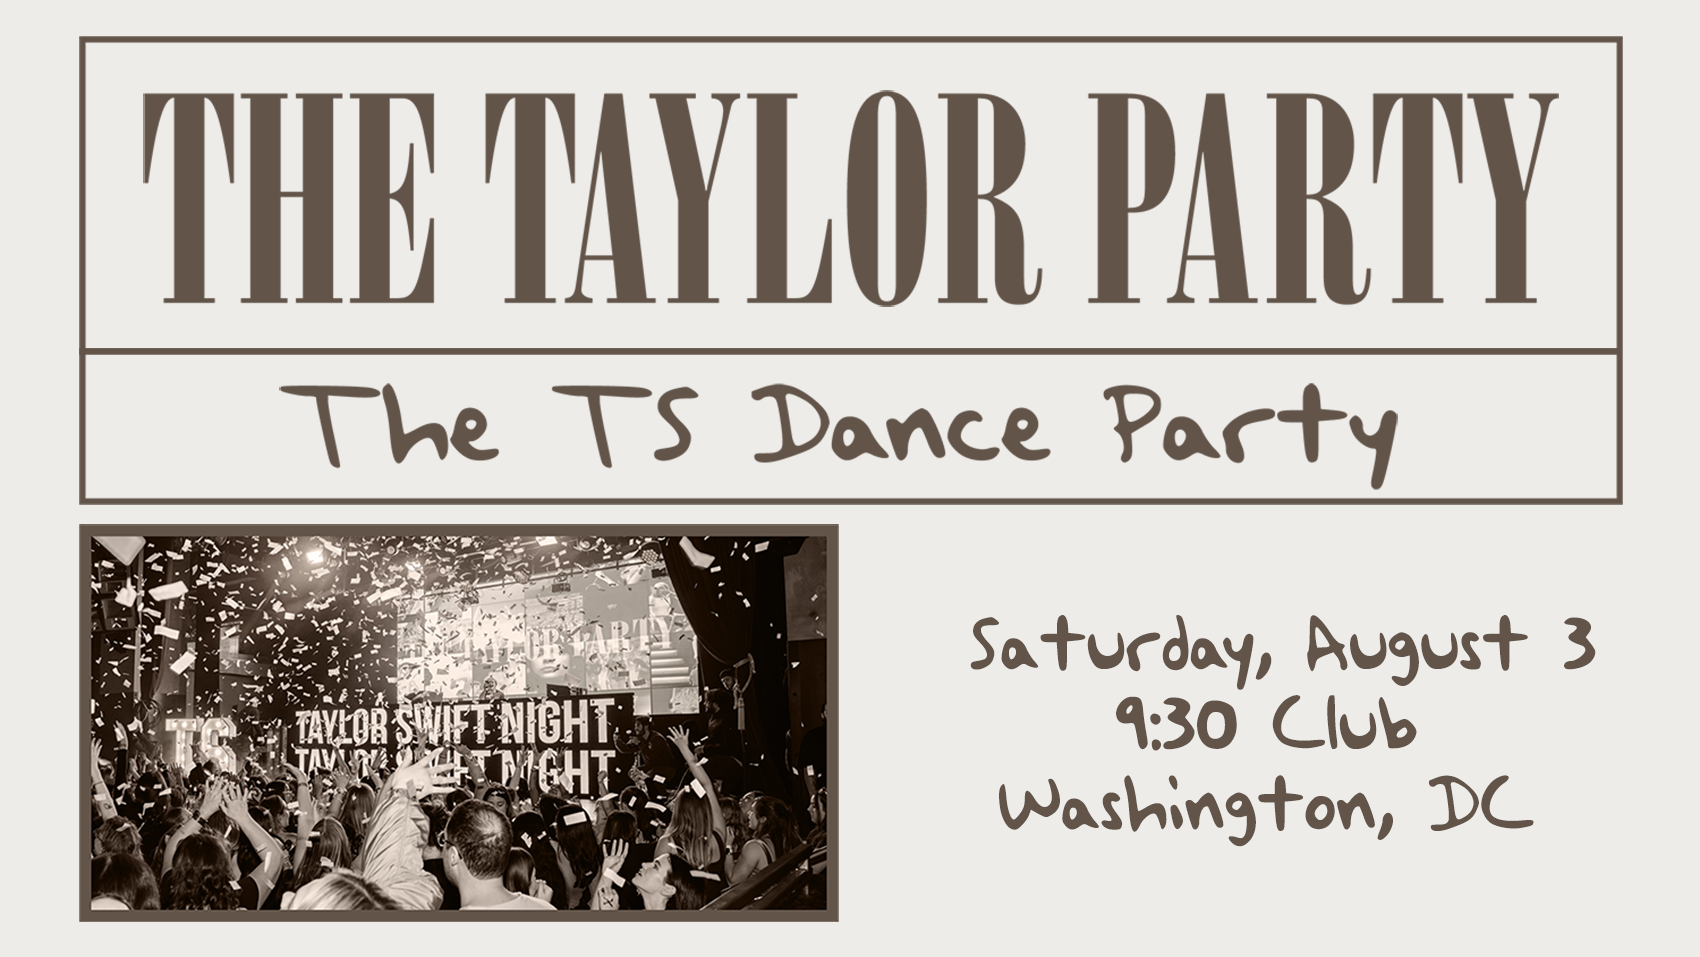 The Taylor Party: The TS Dance Party